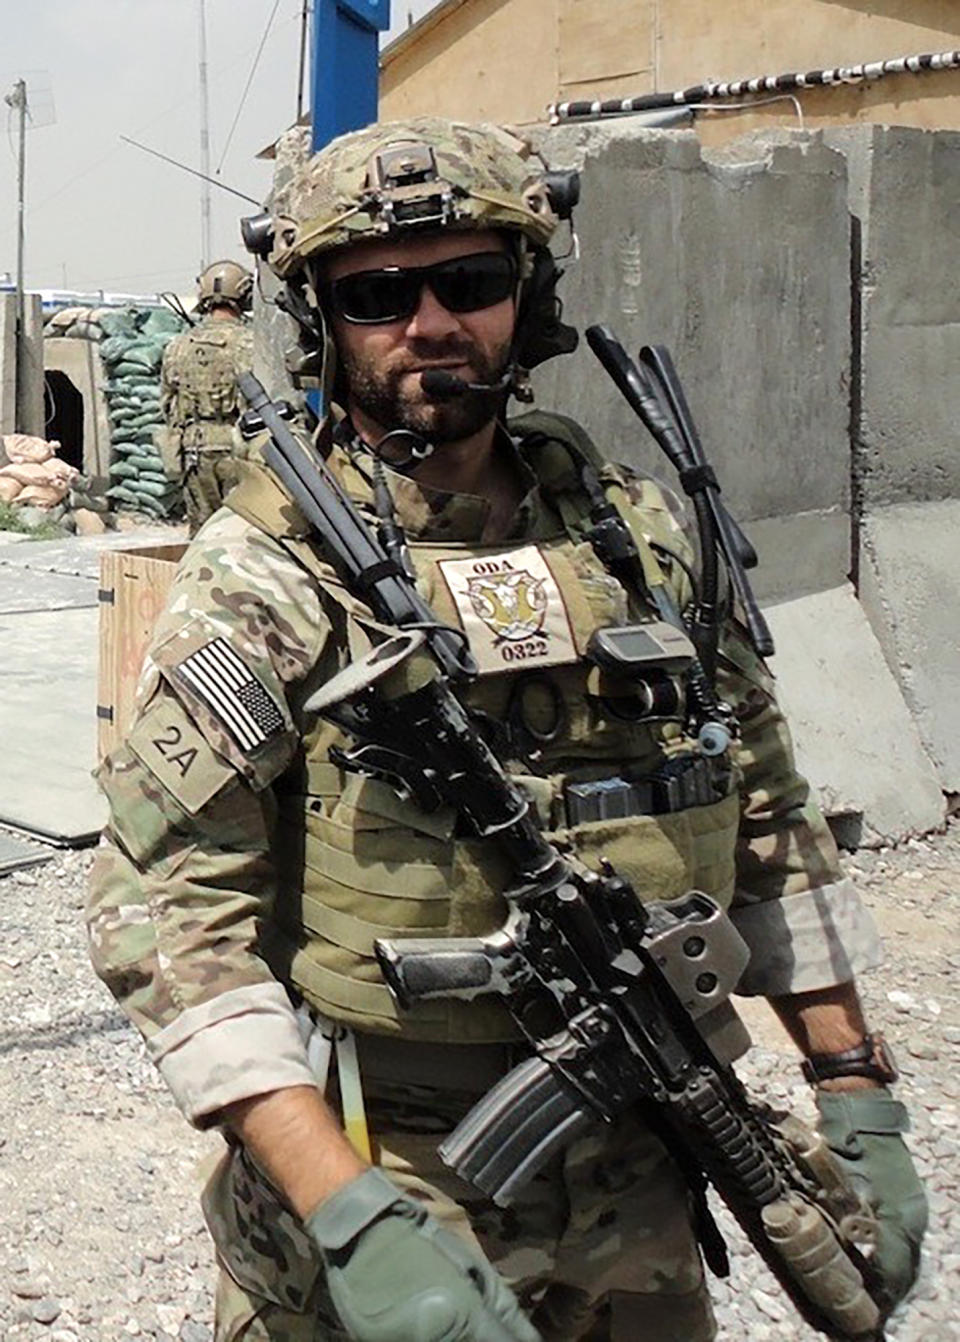 In this undated photo provided by Ryan Brummond, U.S. Special Forces Officer Ryan Brummond is seen in Afghanistan. Mohammad Khalid Wardak or Khalid, as he's called by his friends, had no intention of leaving Afghanistan, where he was a high-profile national police officer who'd worked alongside Brummond and American special forces to defeat the Taliban. Then with stunning speed, his government collapsed. Now he is in hiding with his wife and four children, wounded and hunted by the Taliban, desperately hoping that American officials will repay his loyalty by helping his family escape almost certain death. (Ryan Brummond via AP)